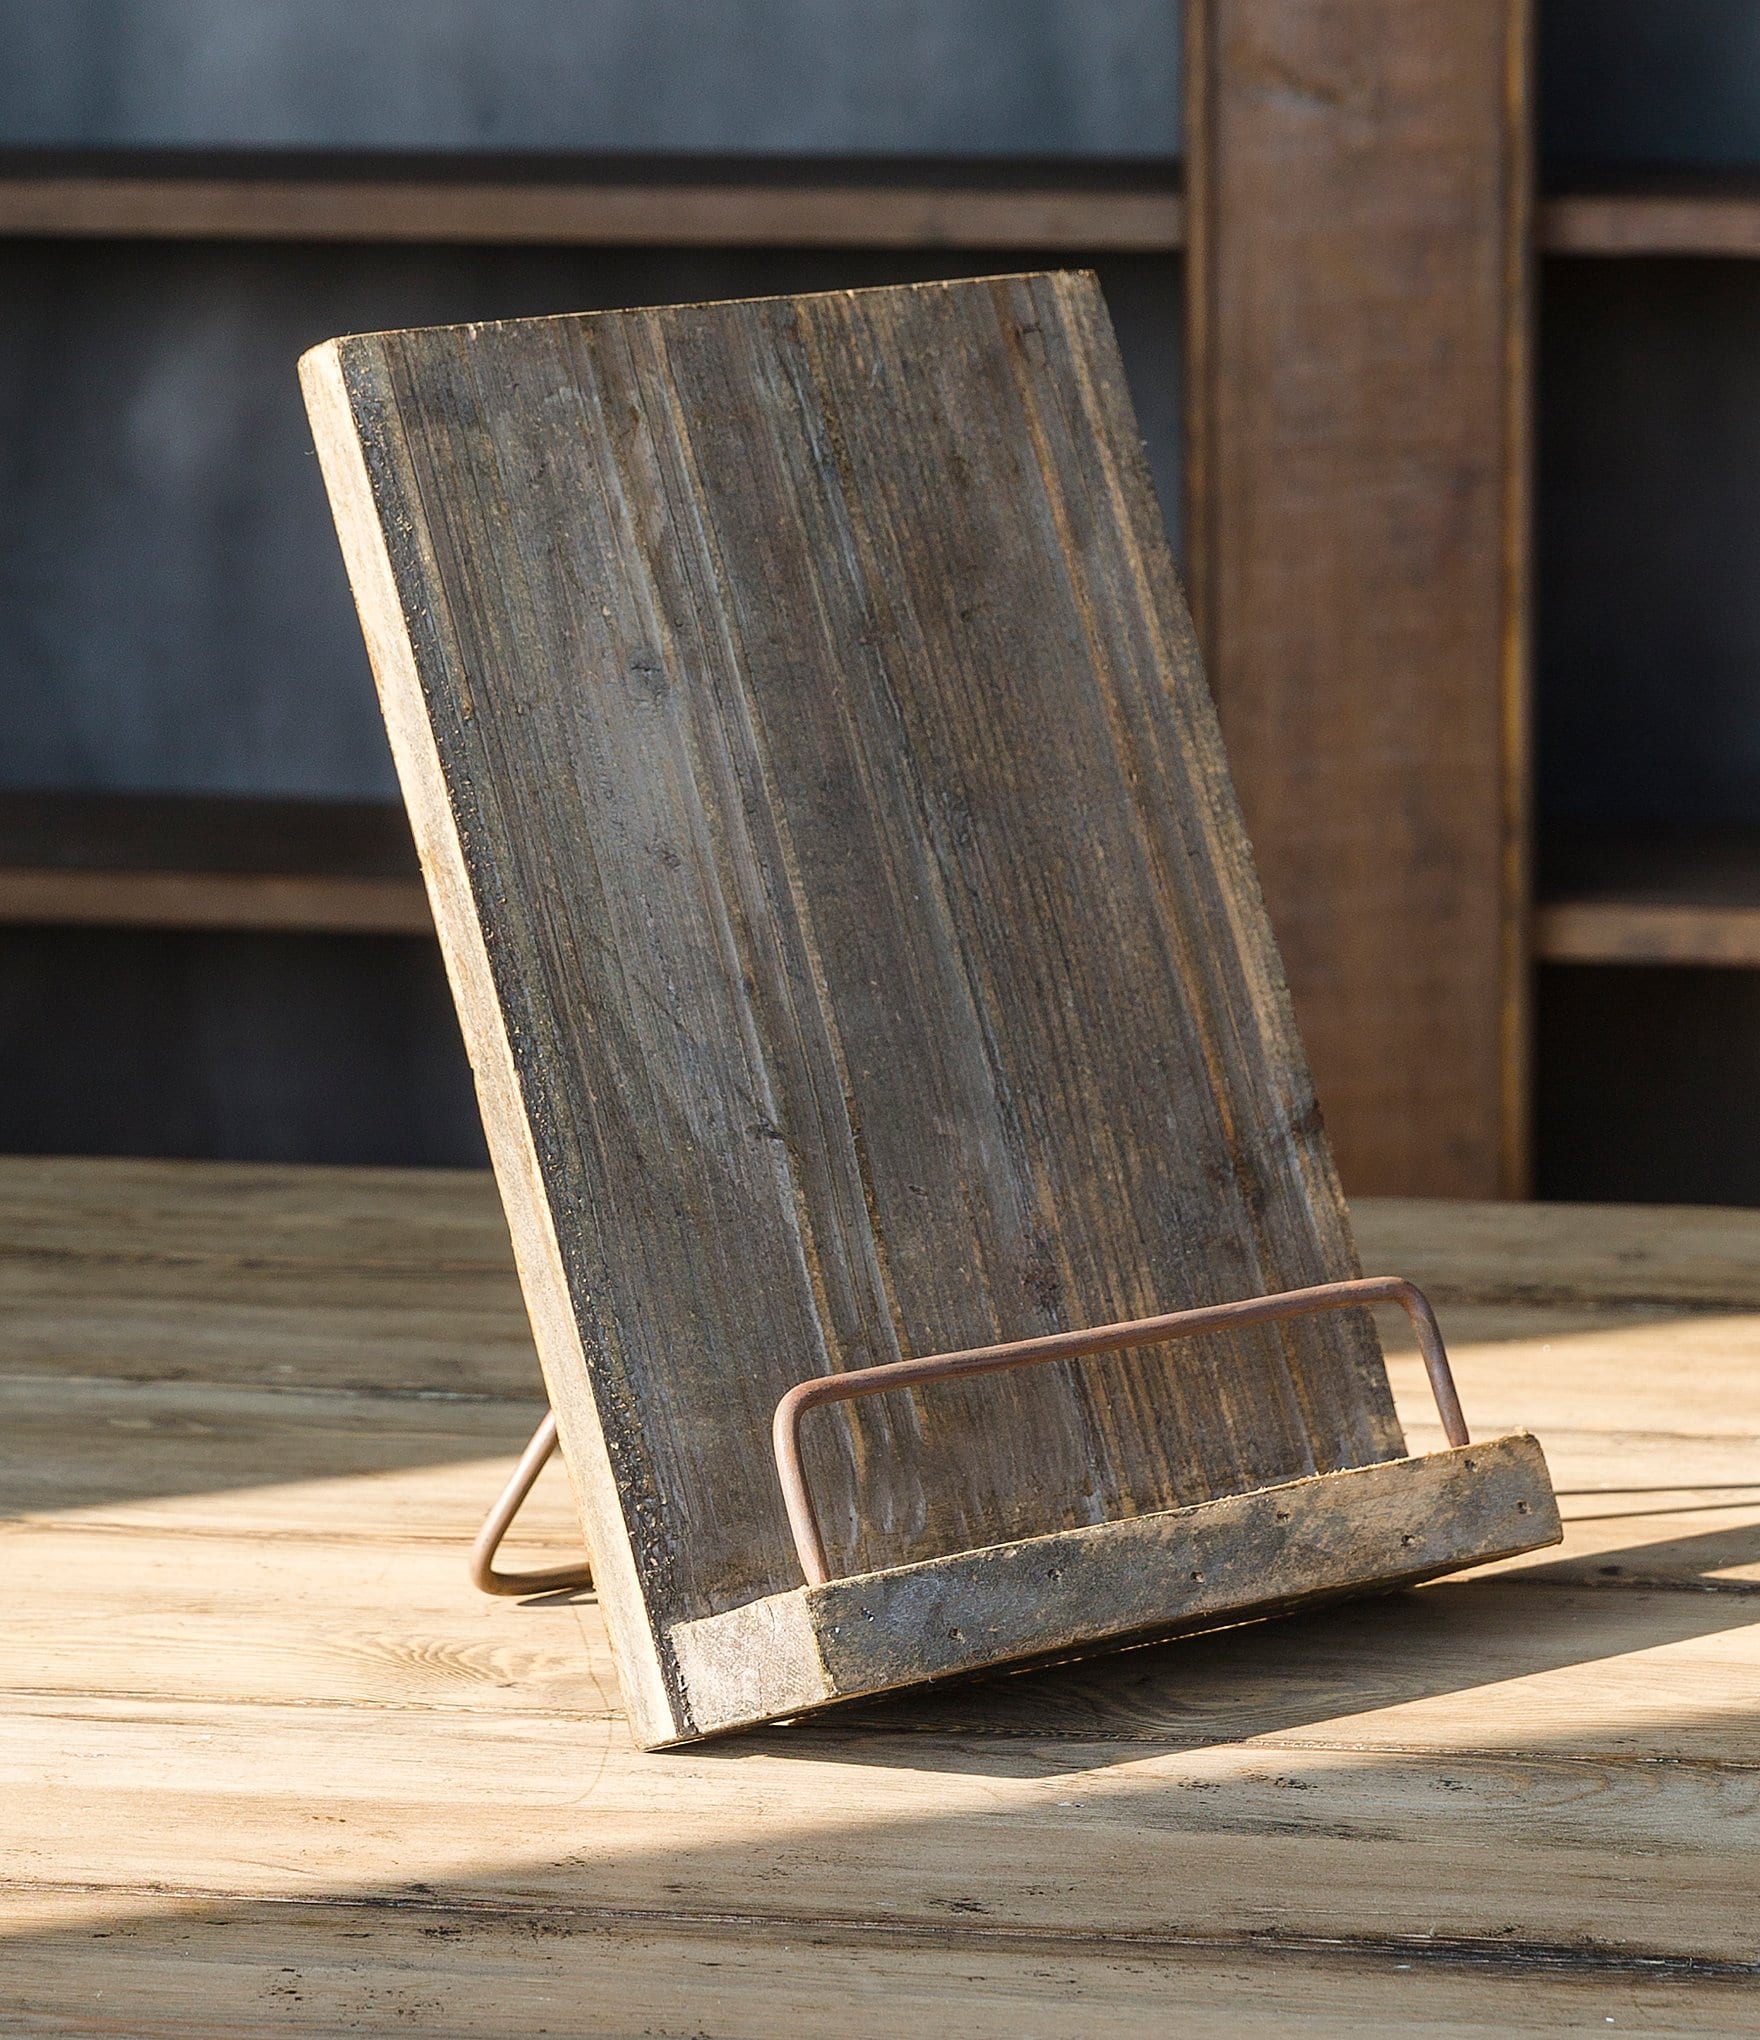 Park Hill Aged Wooden Cookbook Stand